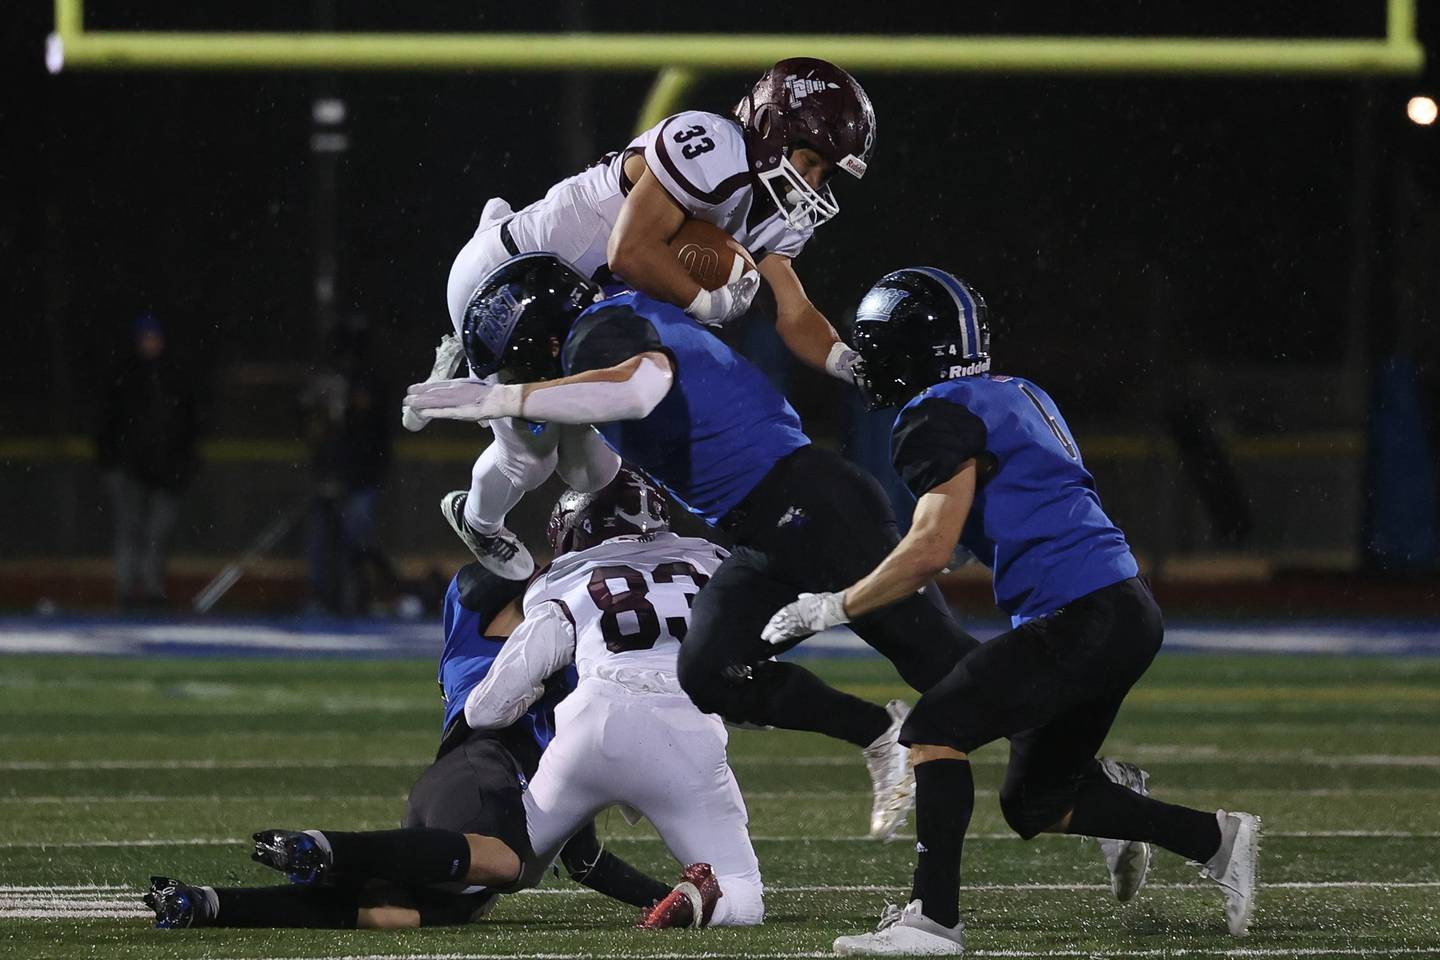 Lockport’s Giovani Zaragoza takes a hit hurdling several players on a run against Lincoln-Way East Friday night.